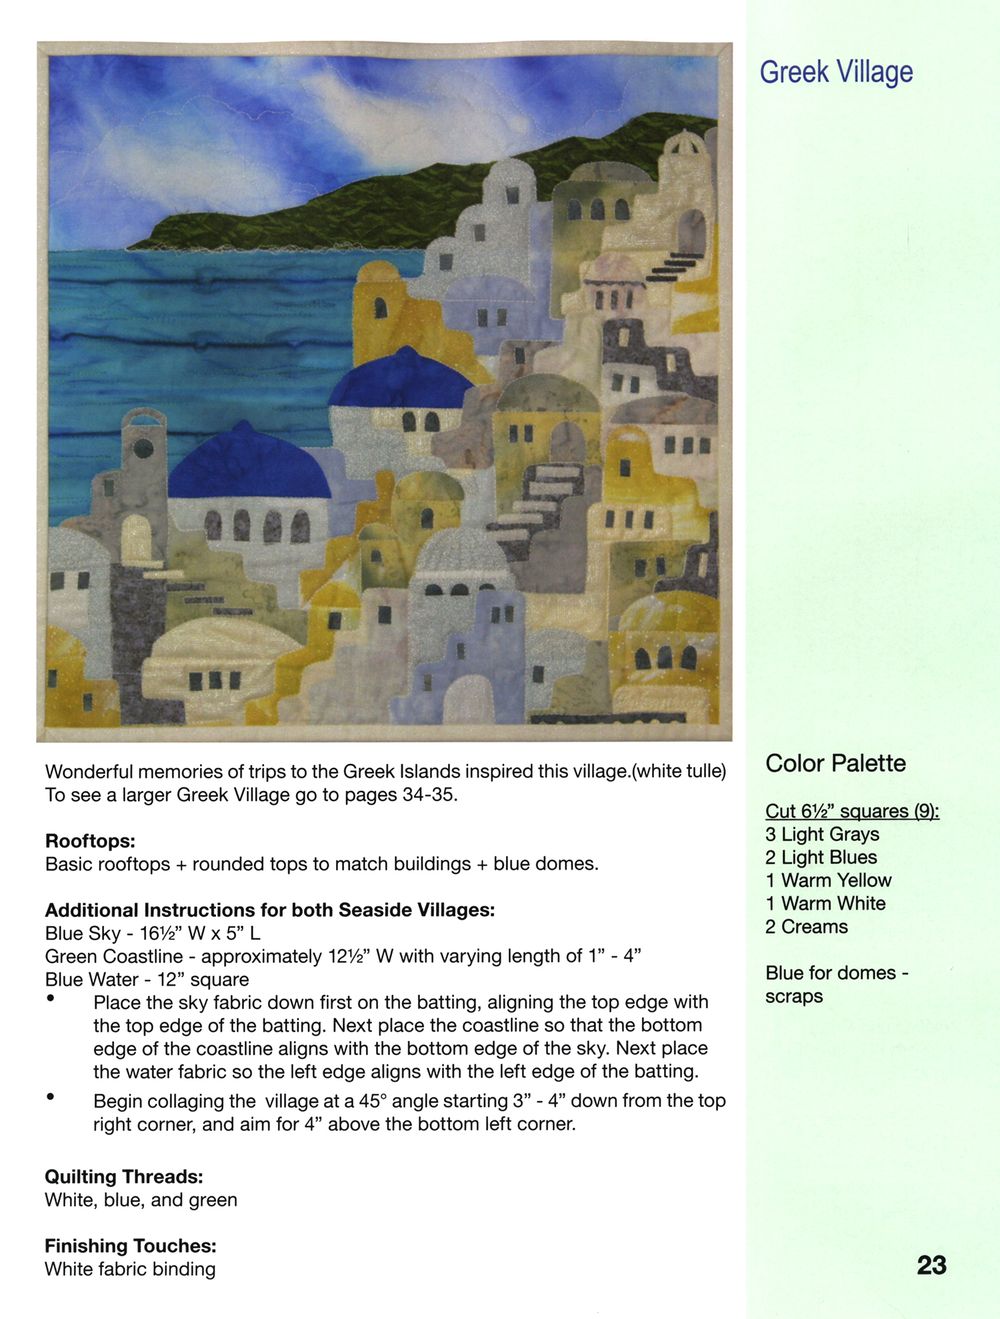 Happy Villages Expanded Updated Edition Quilt Pattern Book by Karen Eckmeier of The Quilted Lizard